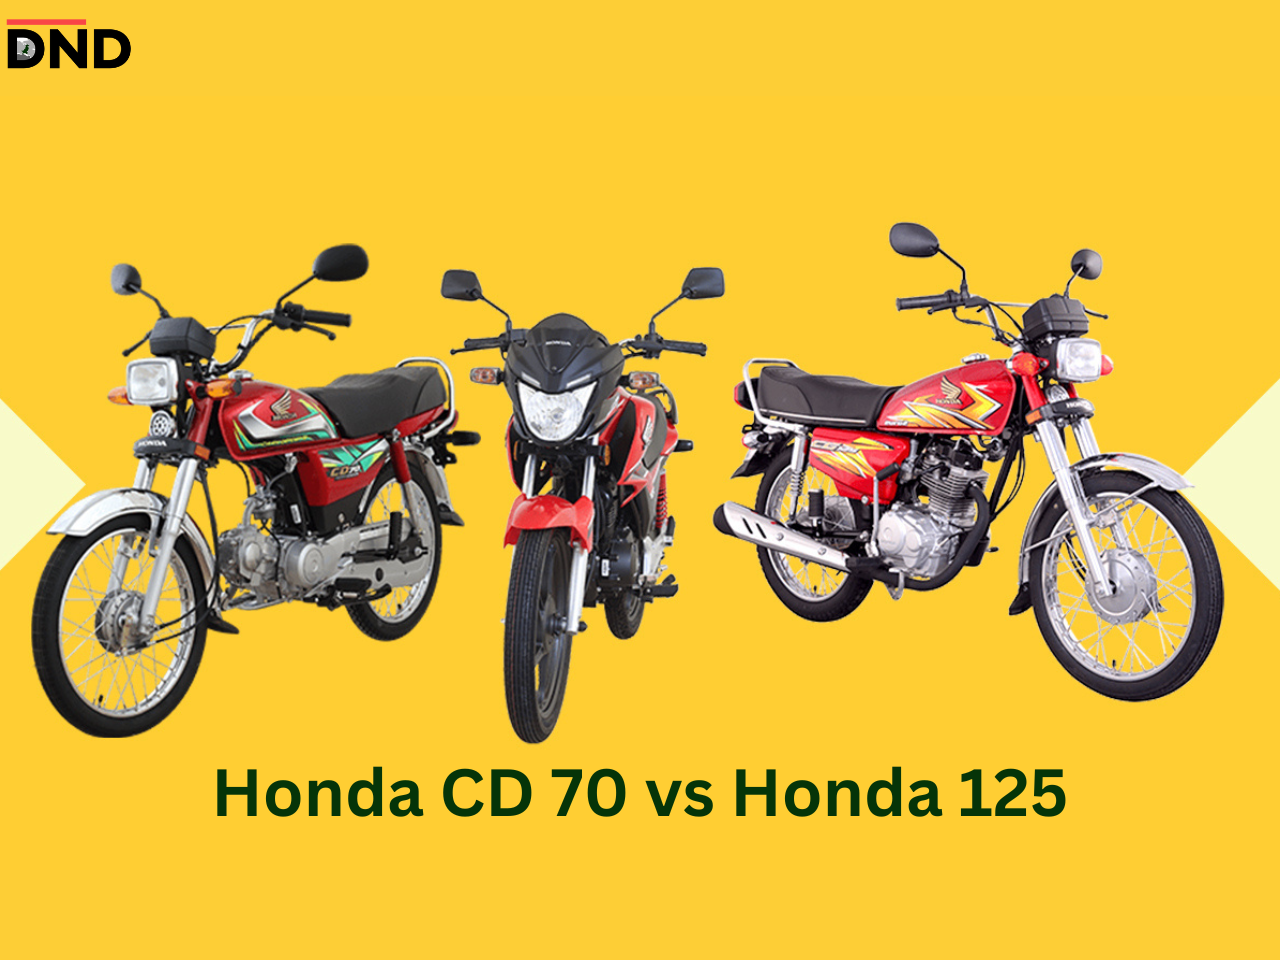 Honda CD 70 vs Honda CG 125: Which Model is Right for You